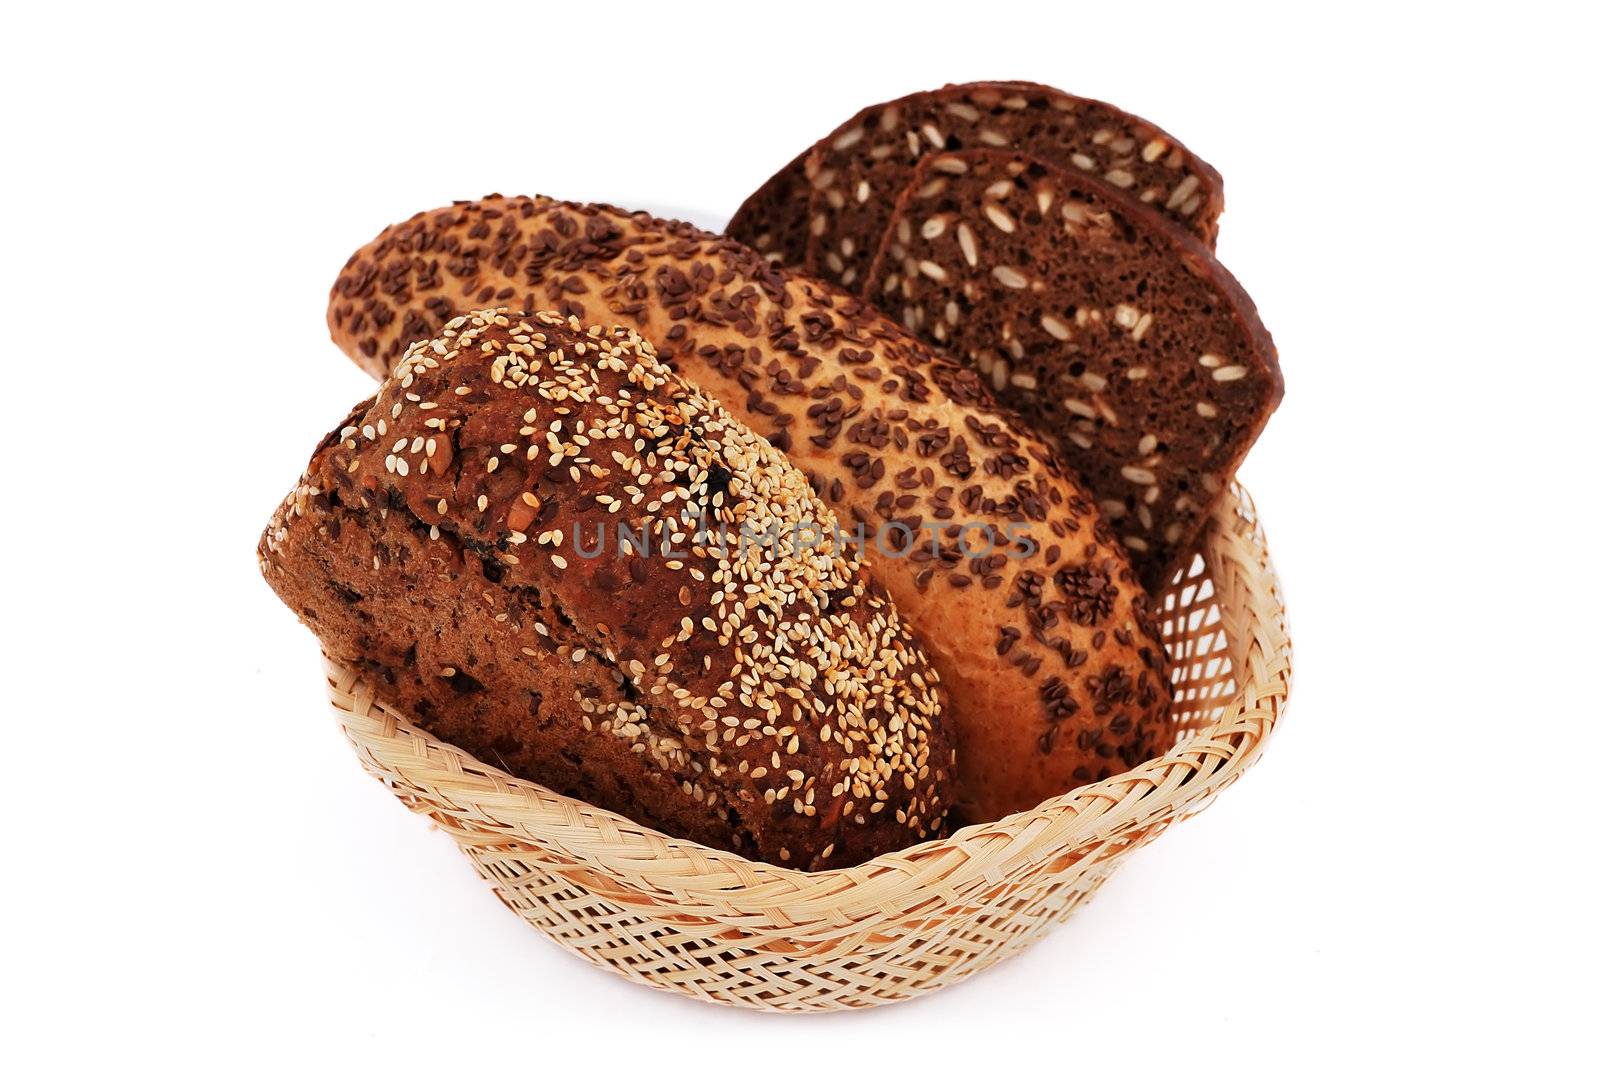 bread with sesame seeds in a wooden basket